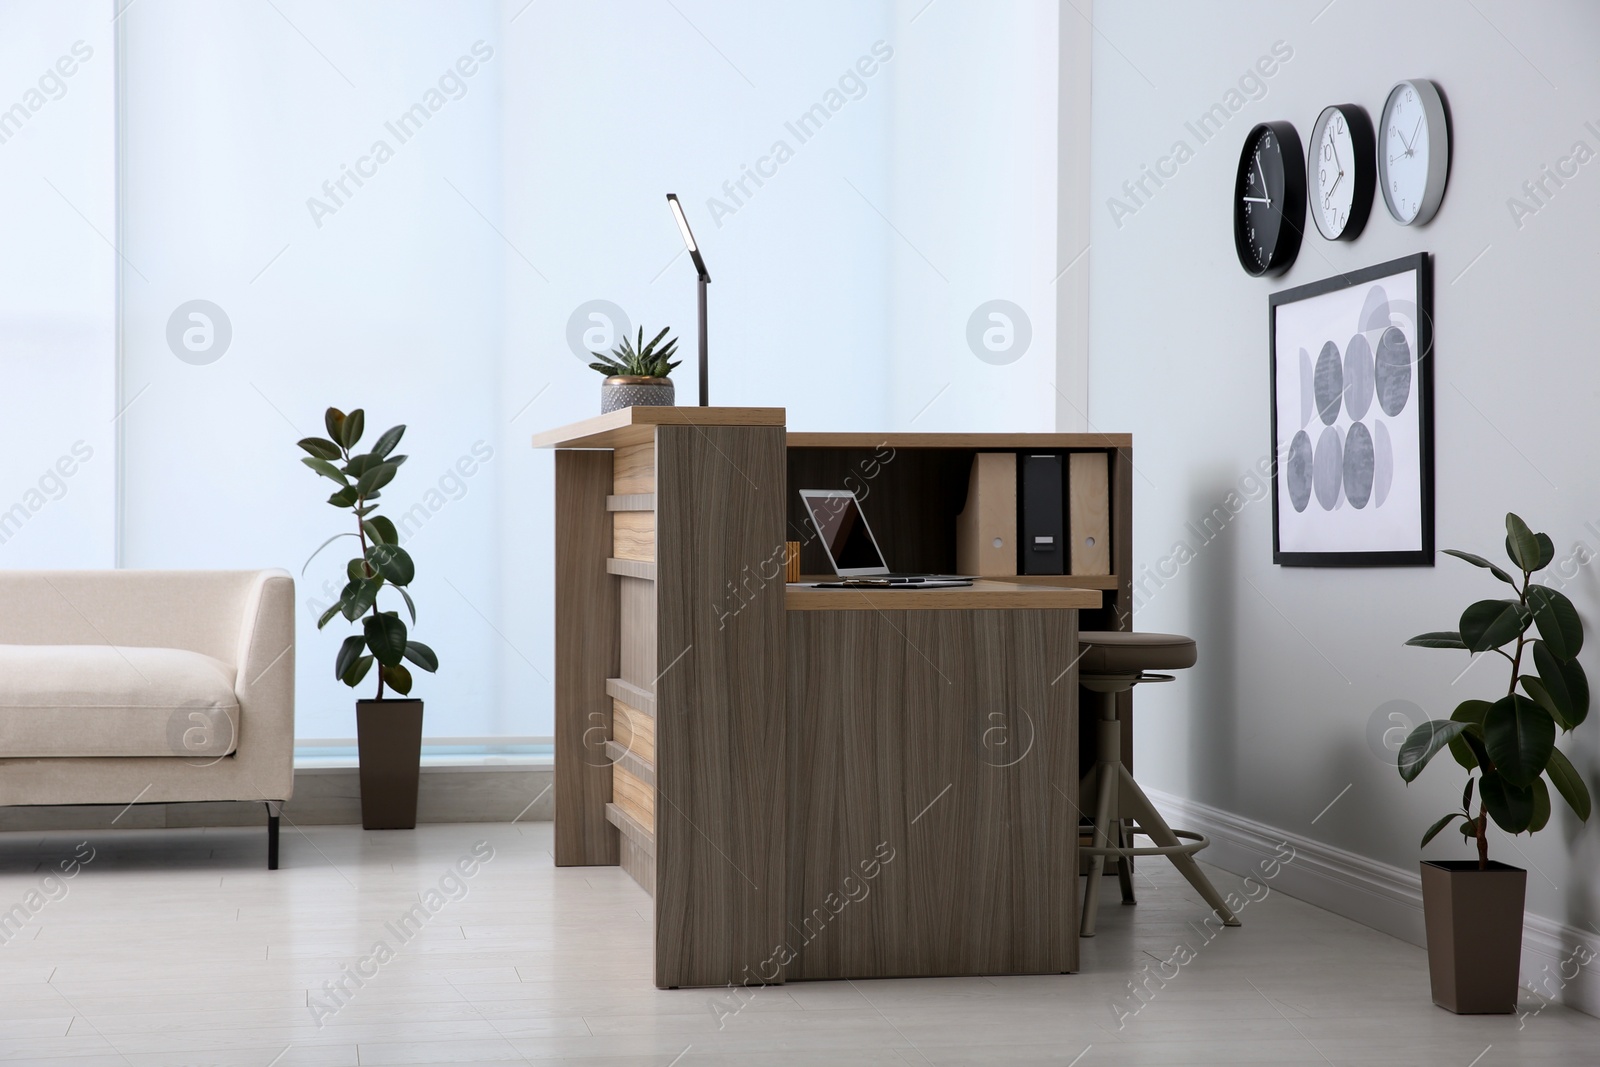 Photo of Lobby interior with stylish wooden receptionist desk